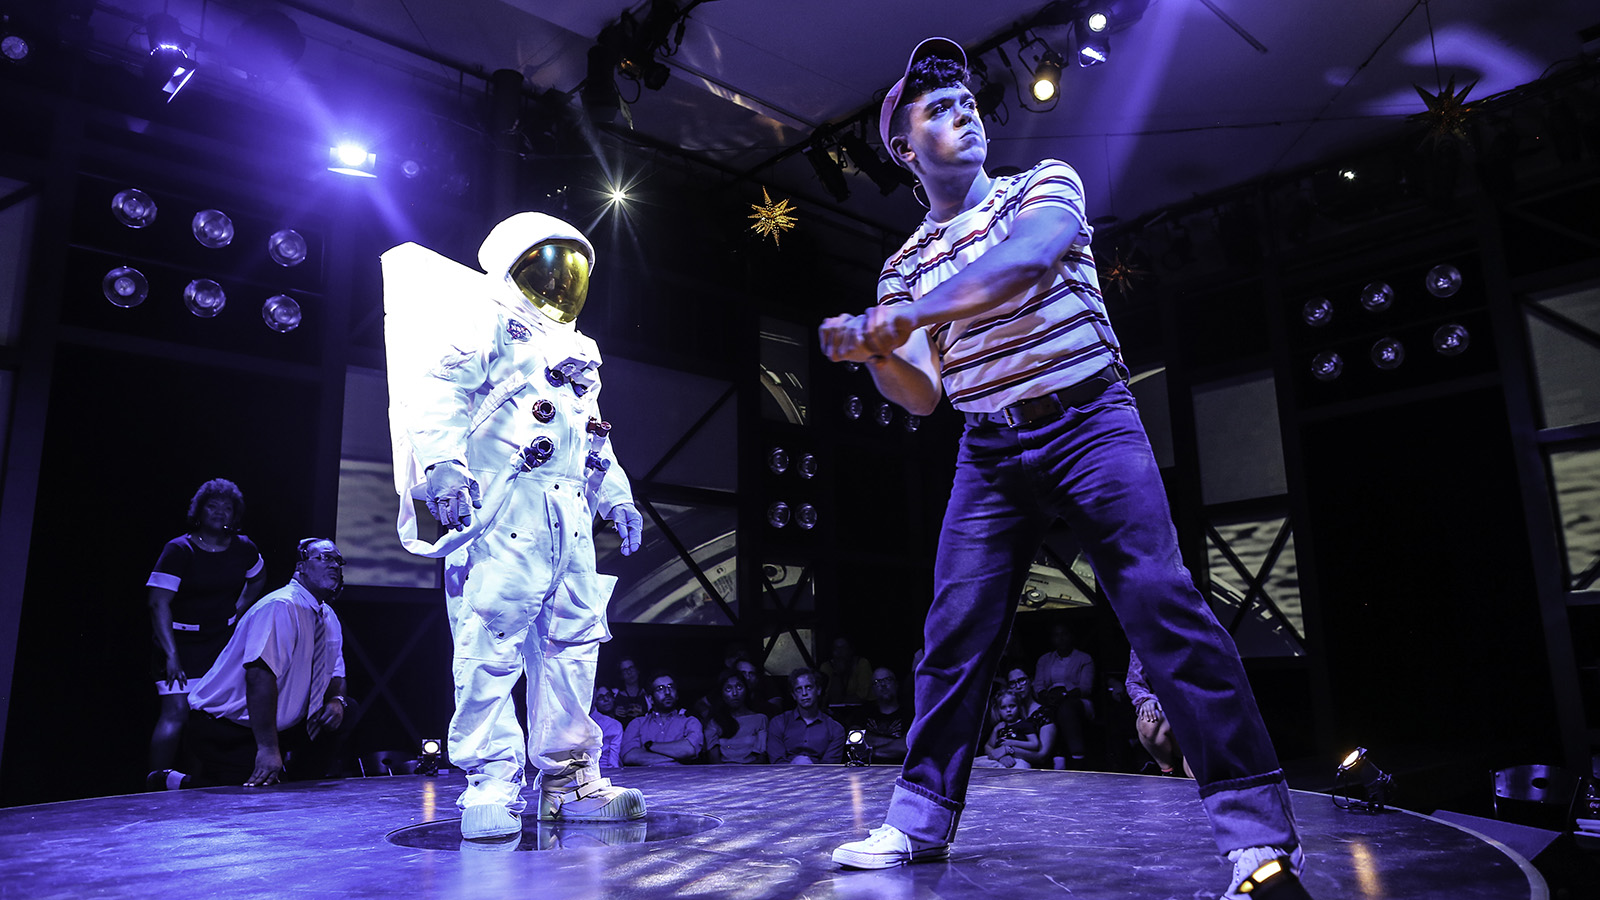 Actors dressed as an astronaut and a young person playing baseball in Earthrise